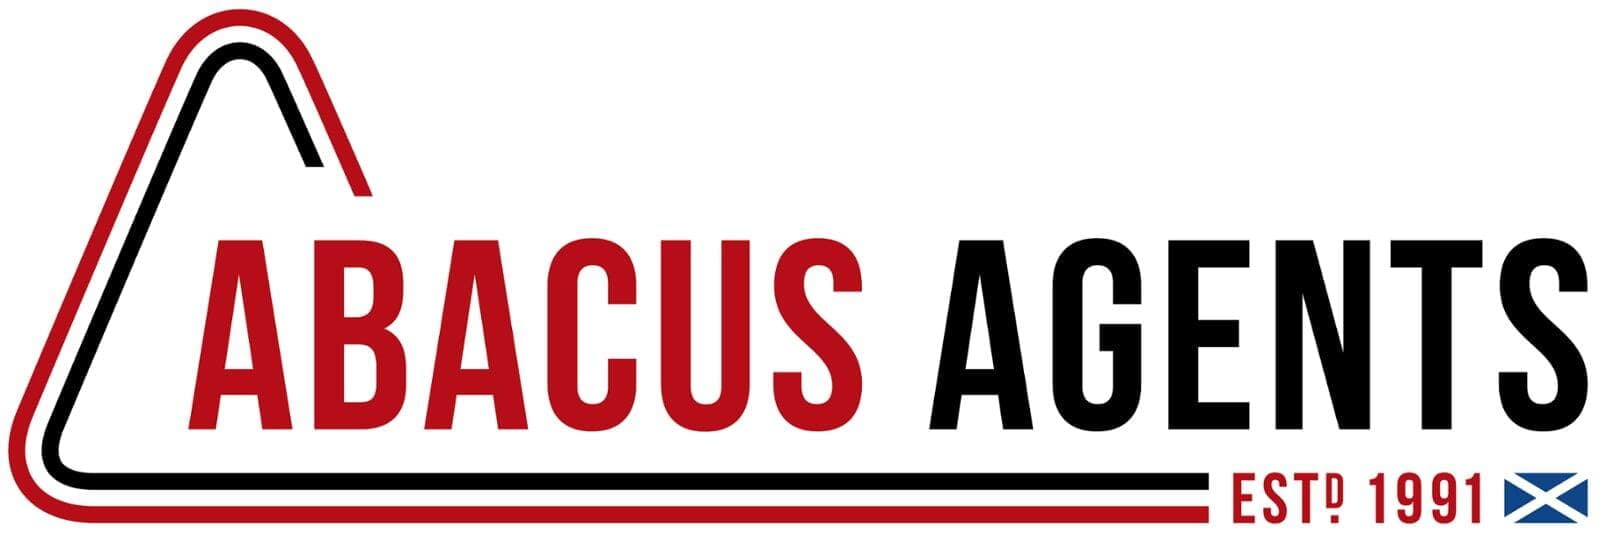 Abacus Agents